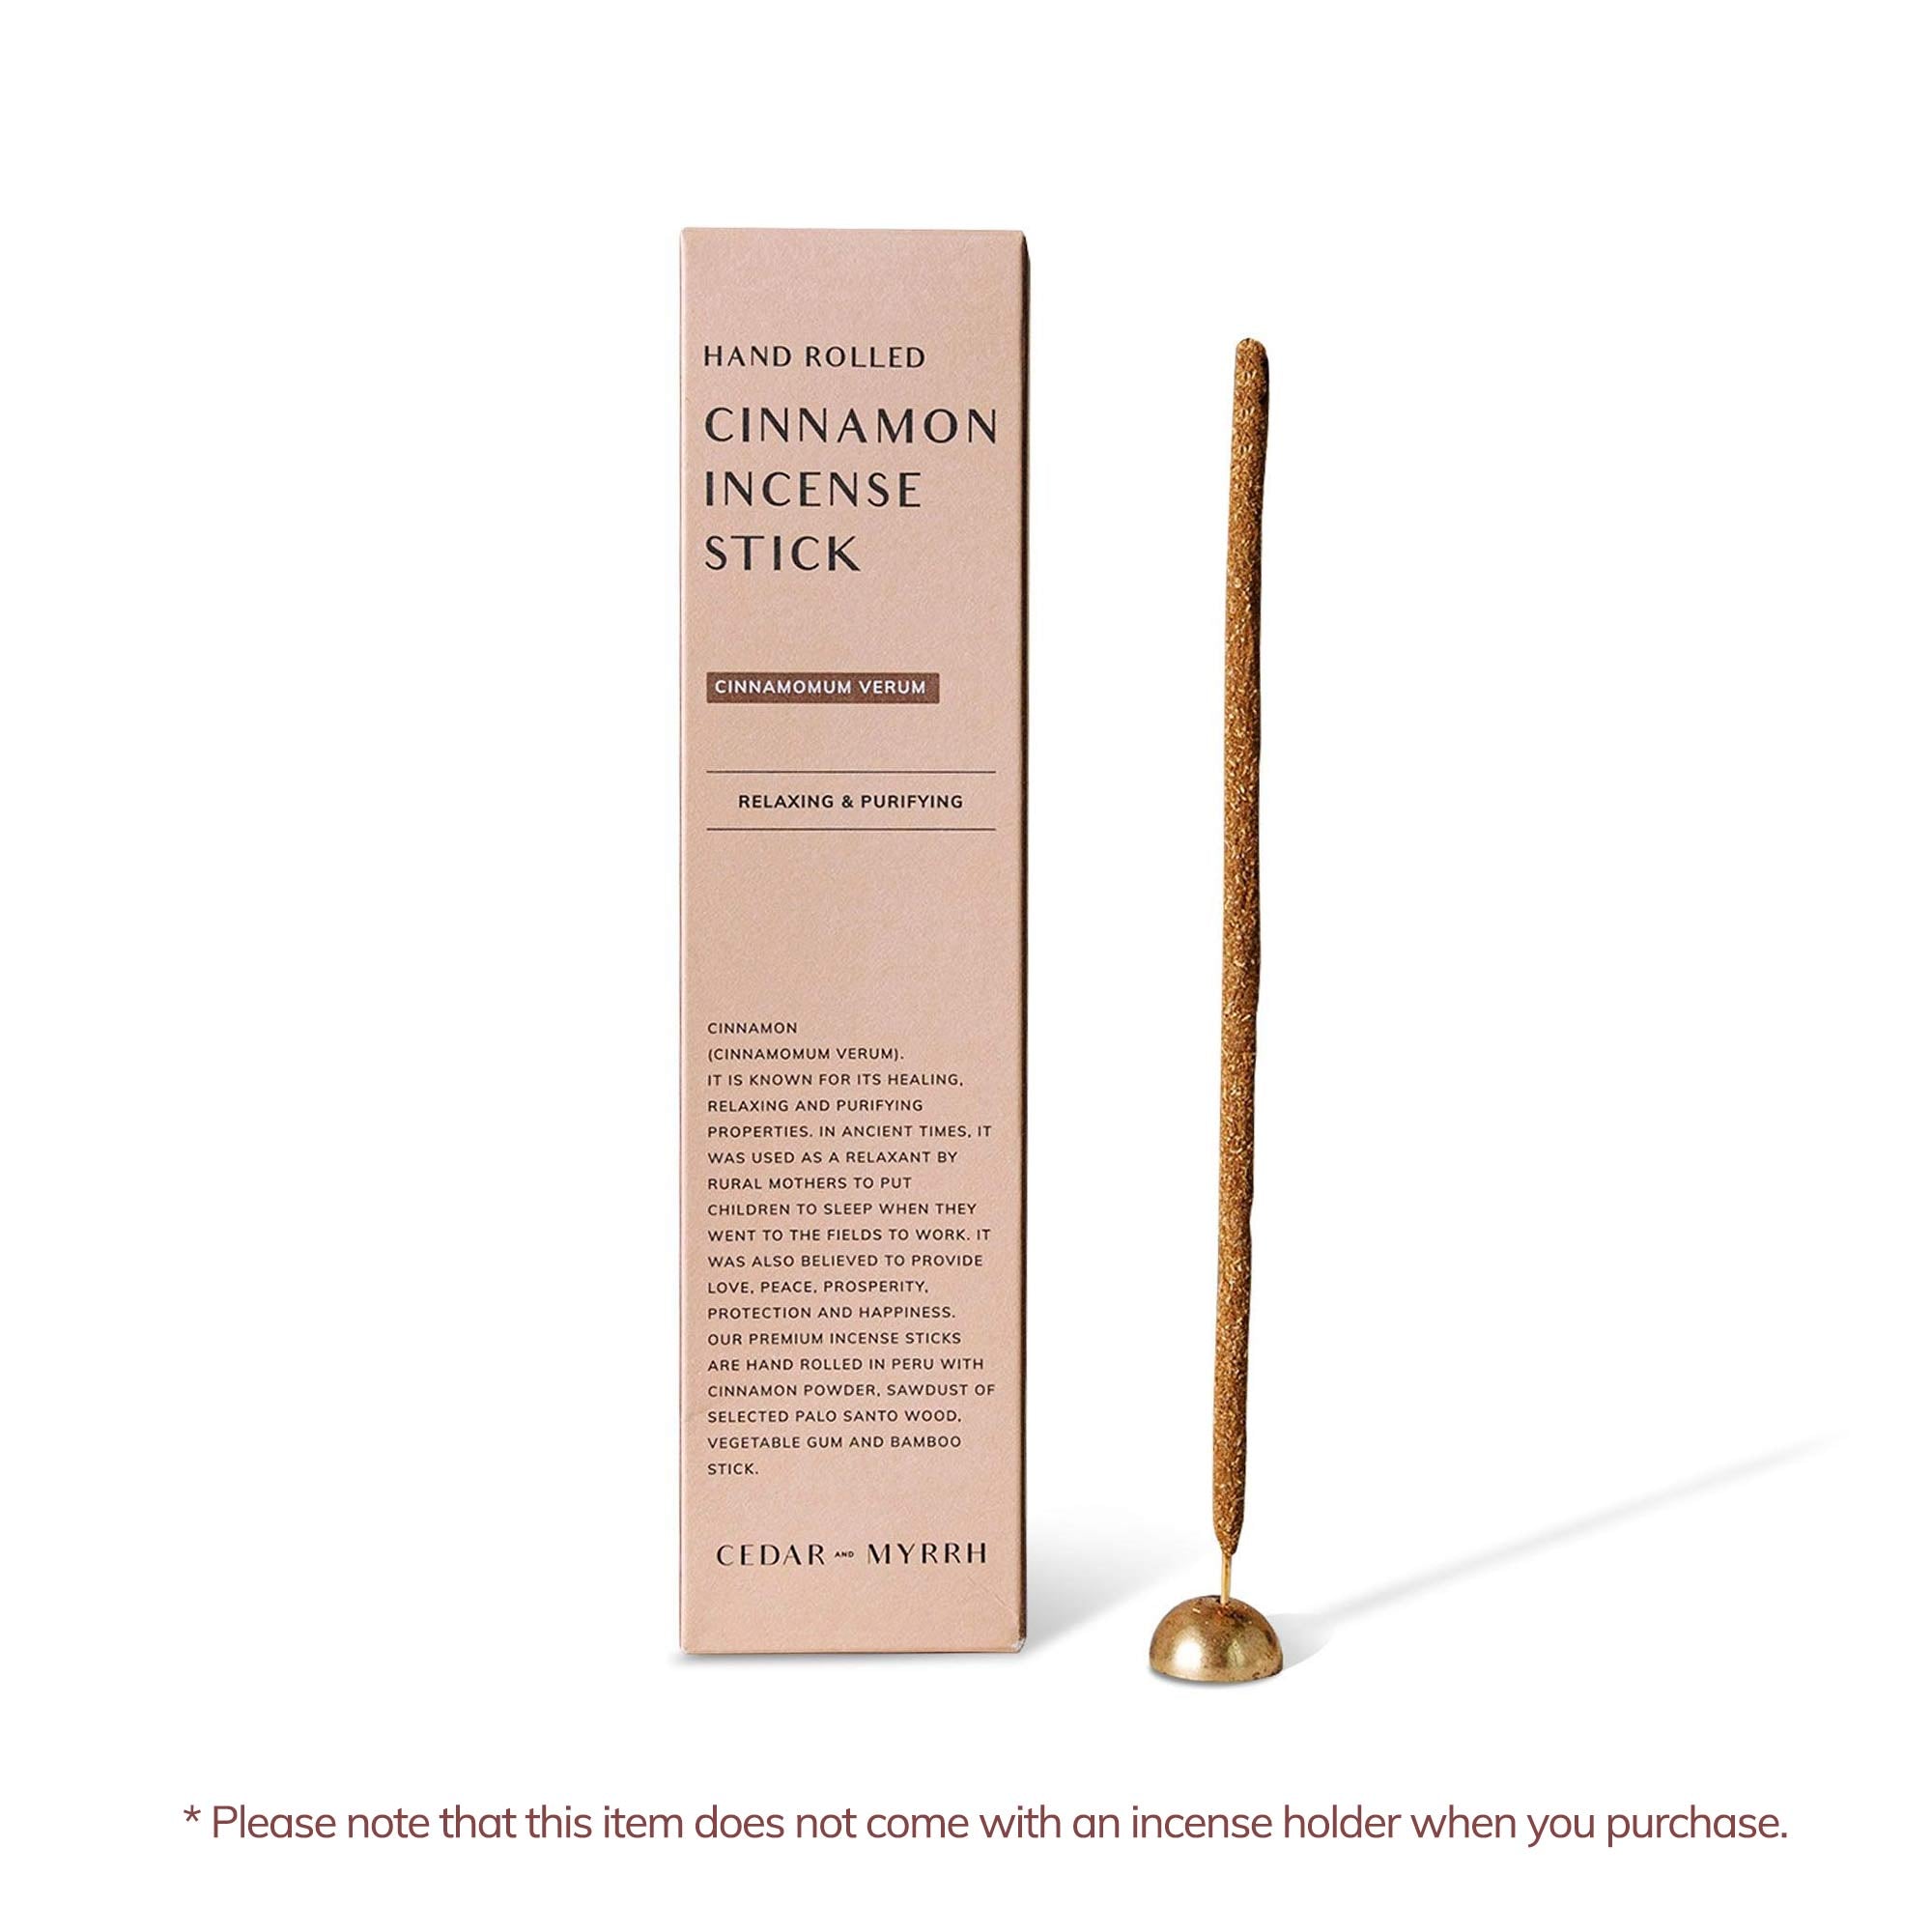 Cinnamon stick with incense holder and the package.